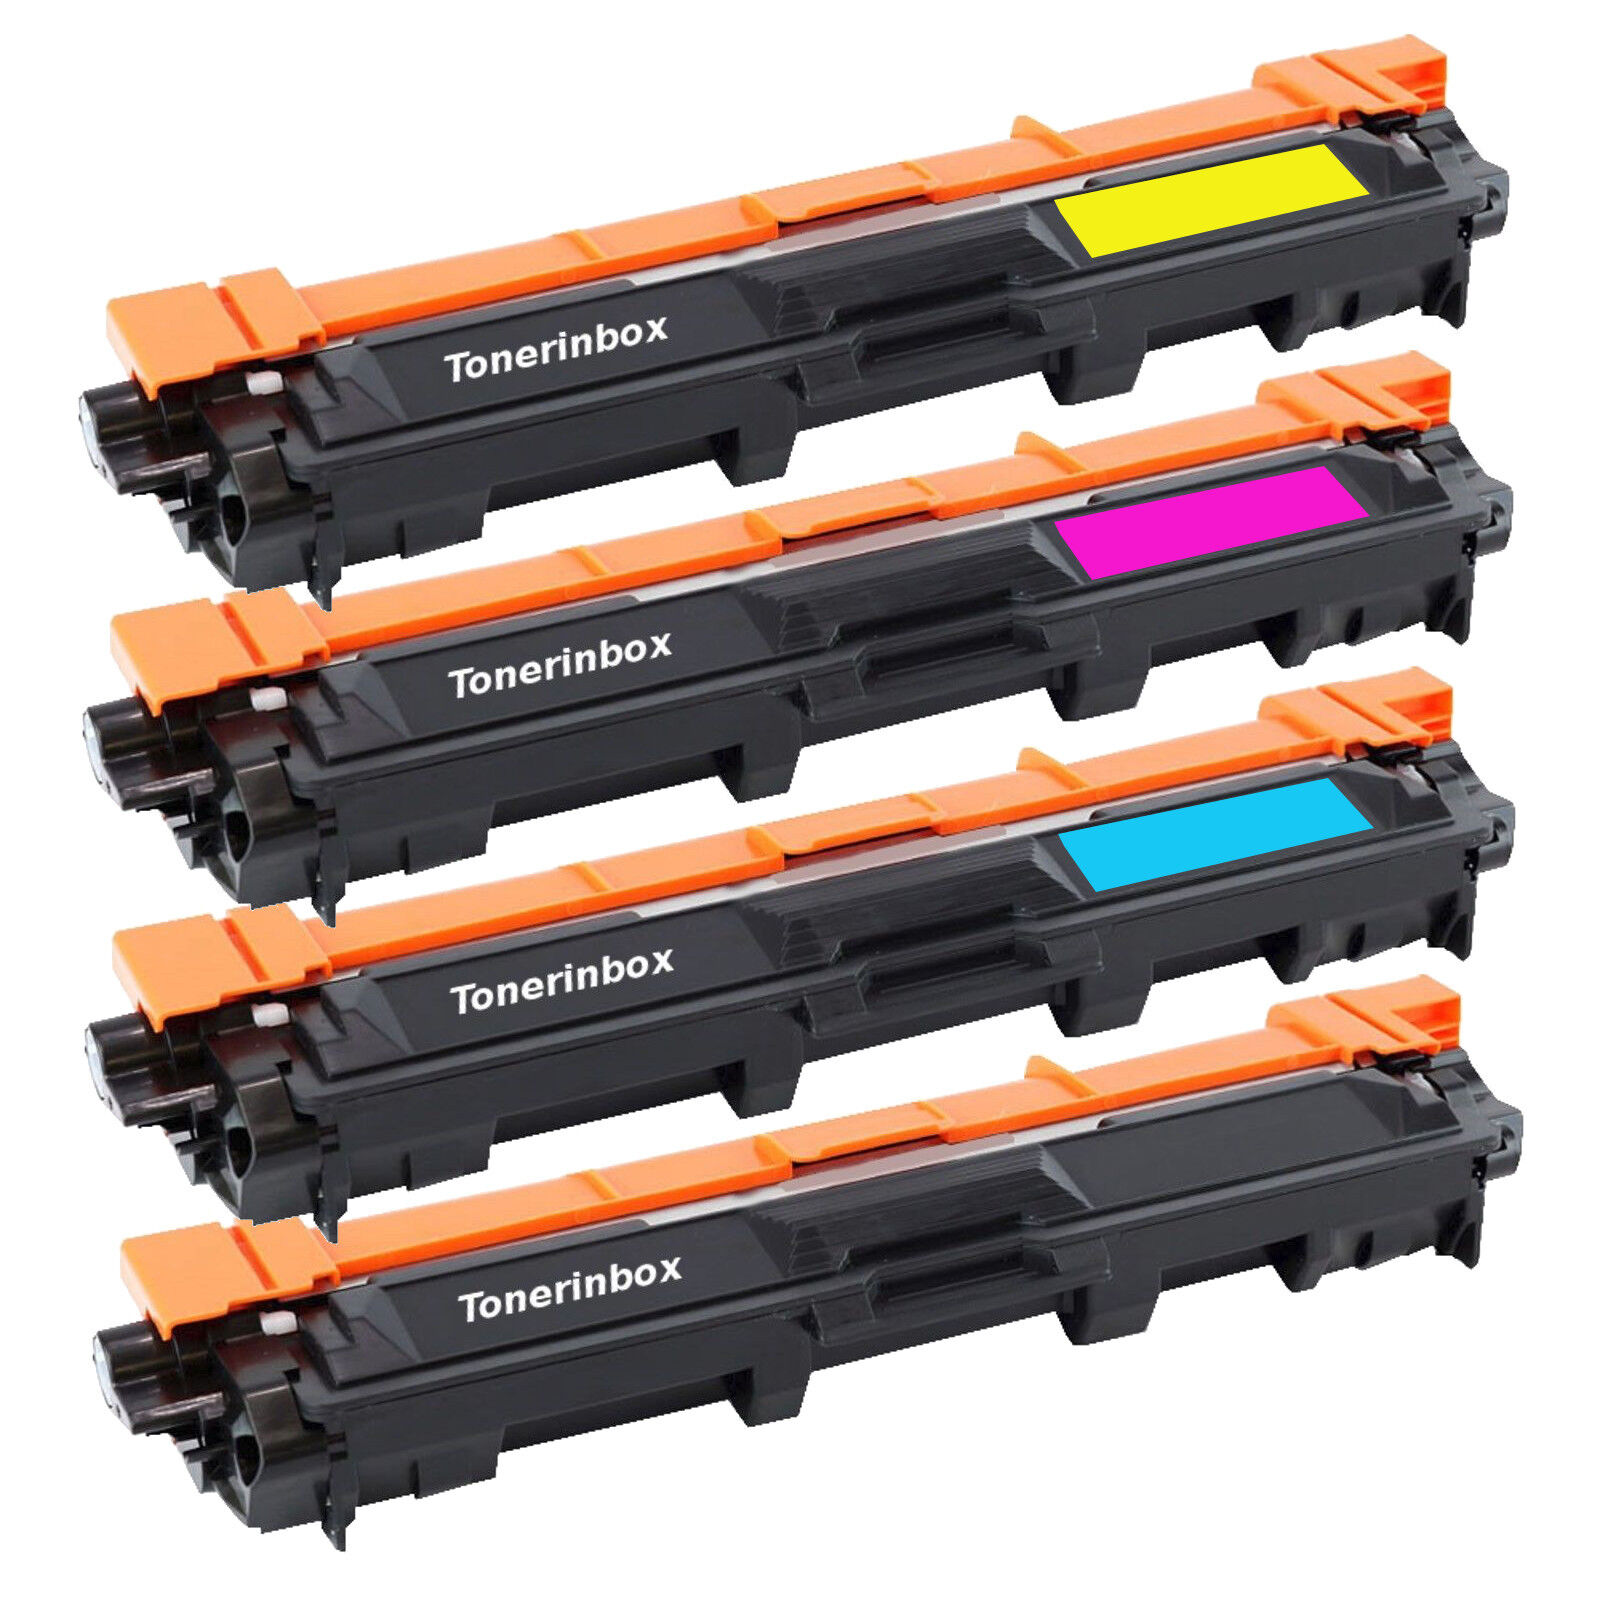 4 Pk TN221 BK TN225 Color Toner For Brother MFC-9130CW, MFC-9330CDW, MFC-9340CDW